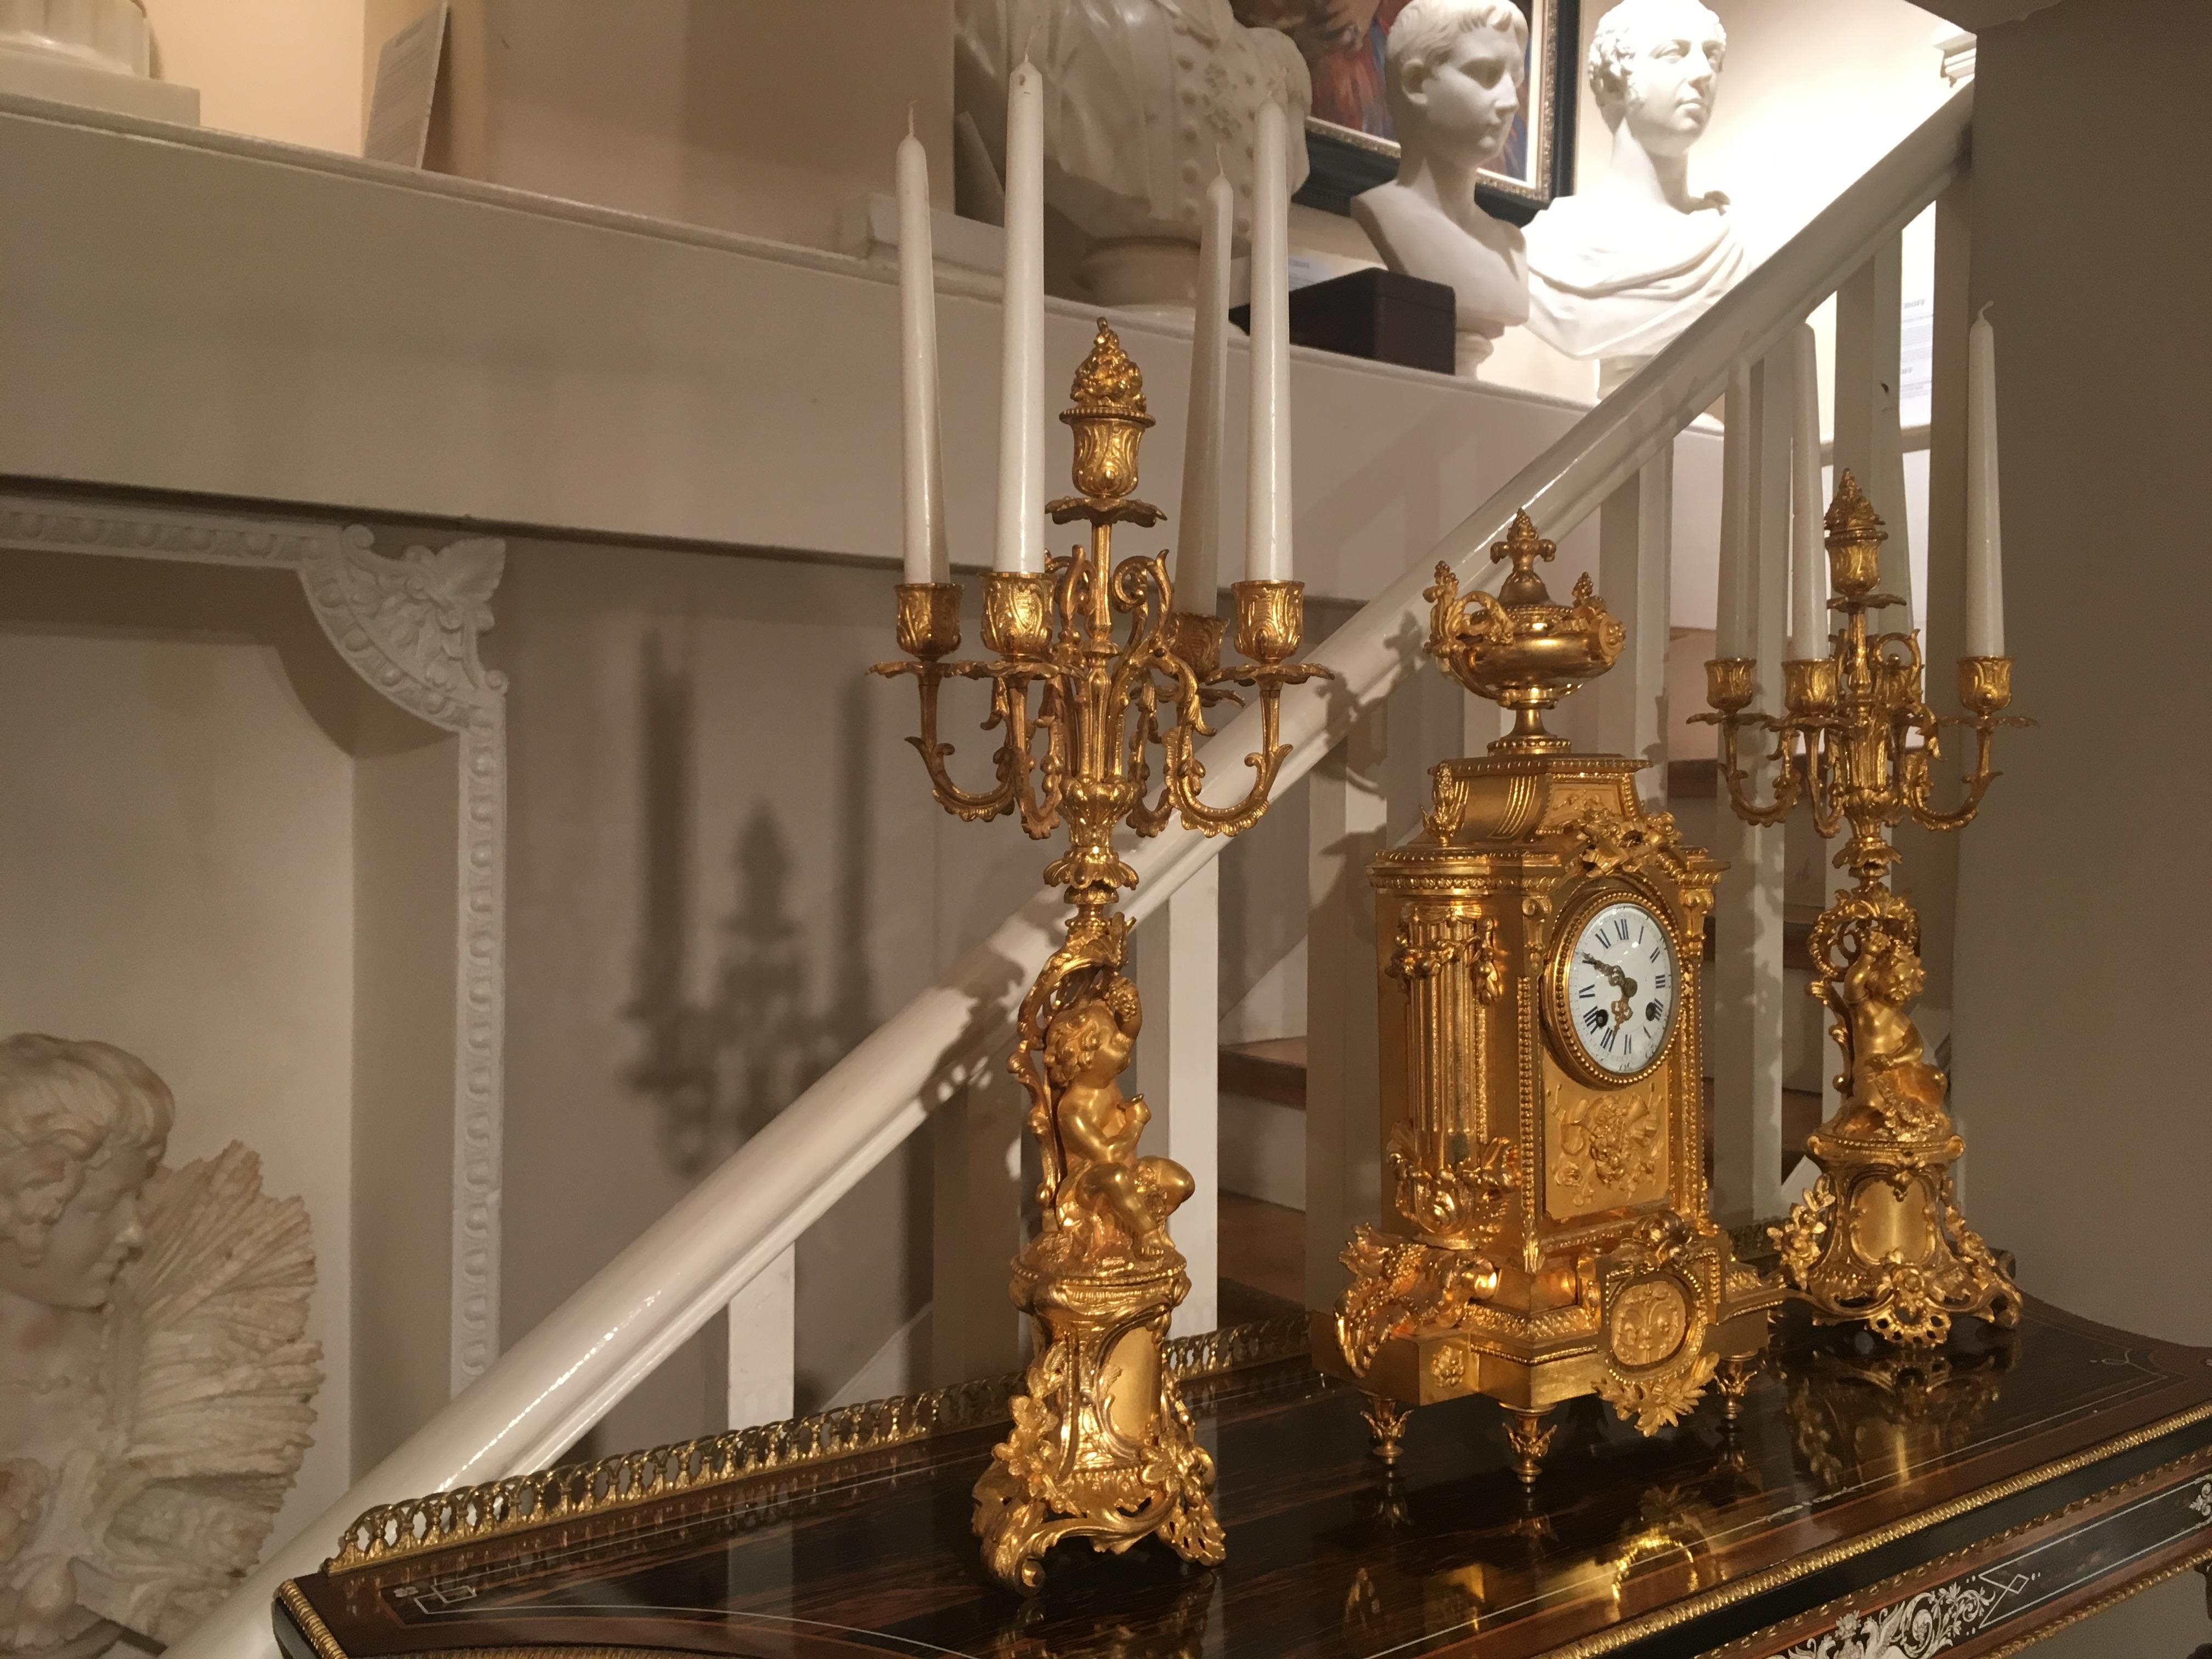 Exceptional French 19th Century Gilt Bronze Mantel Clock and Candelabra Set For Sale 2